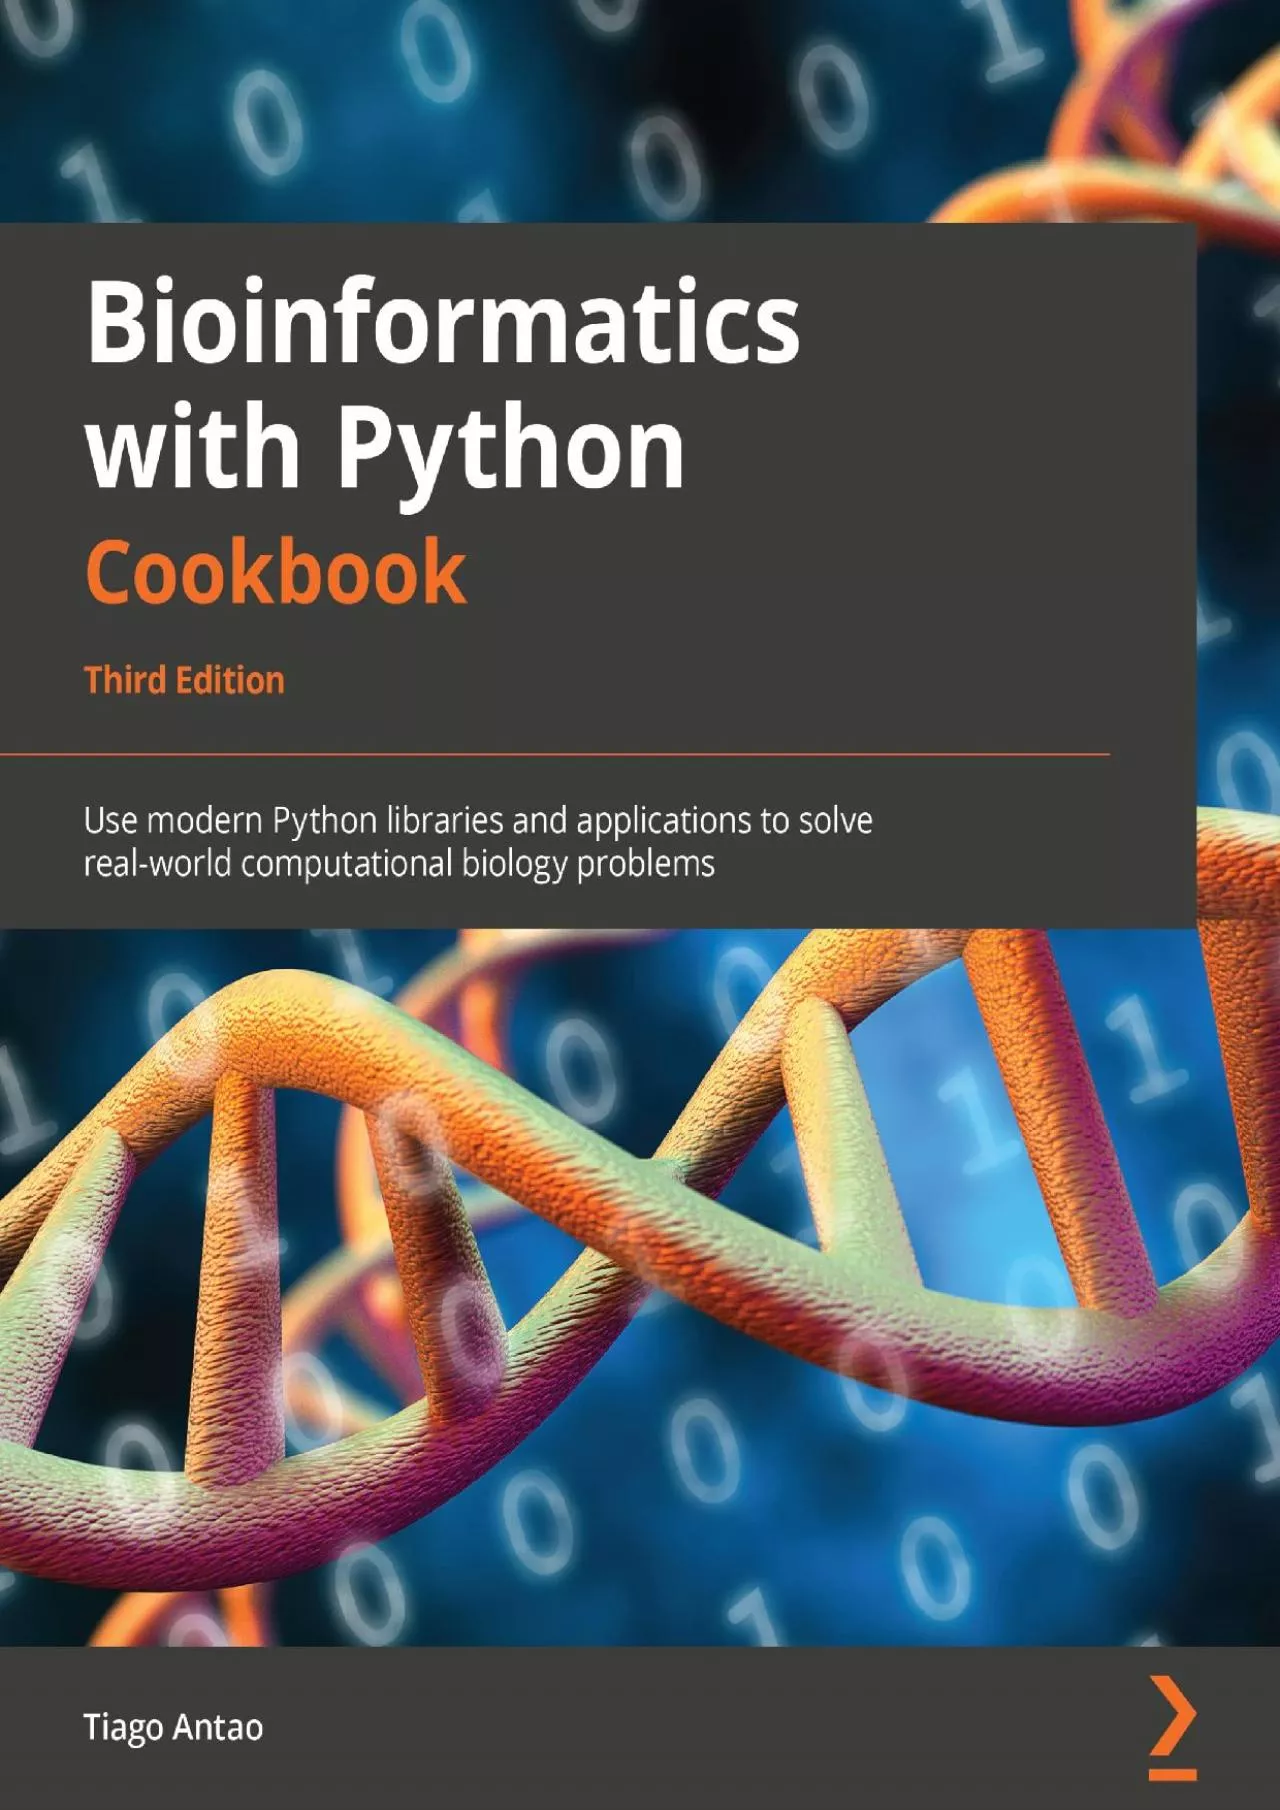 [READING BOOK]-Bioinformatics with Python Cookbook Use modern Python libraries and applications